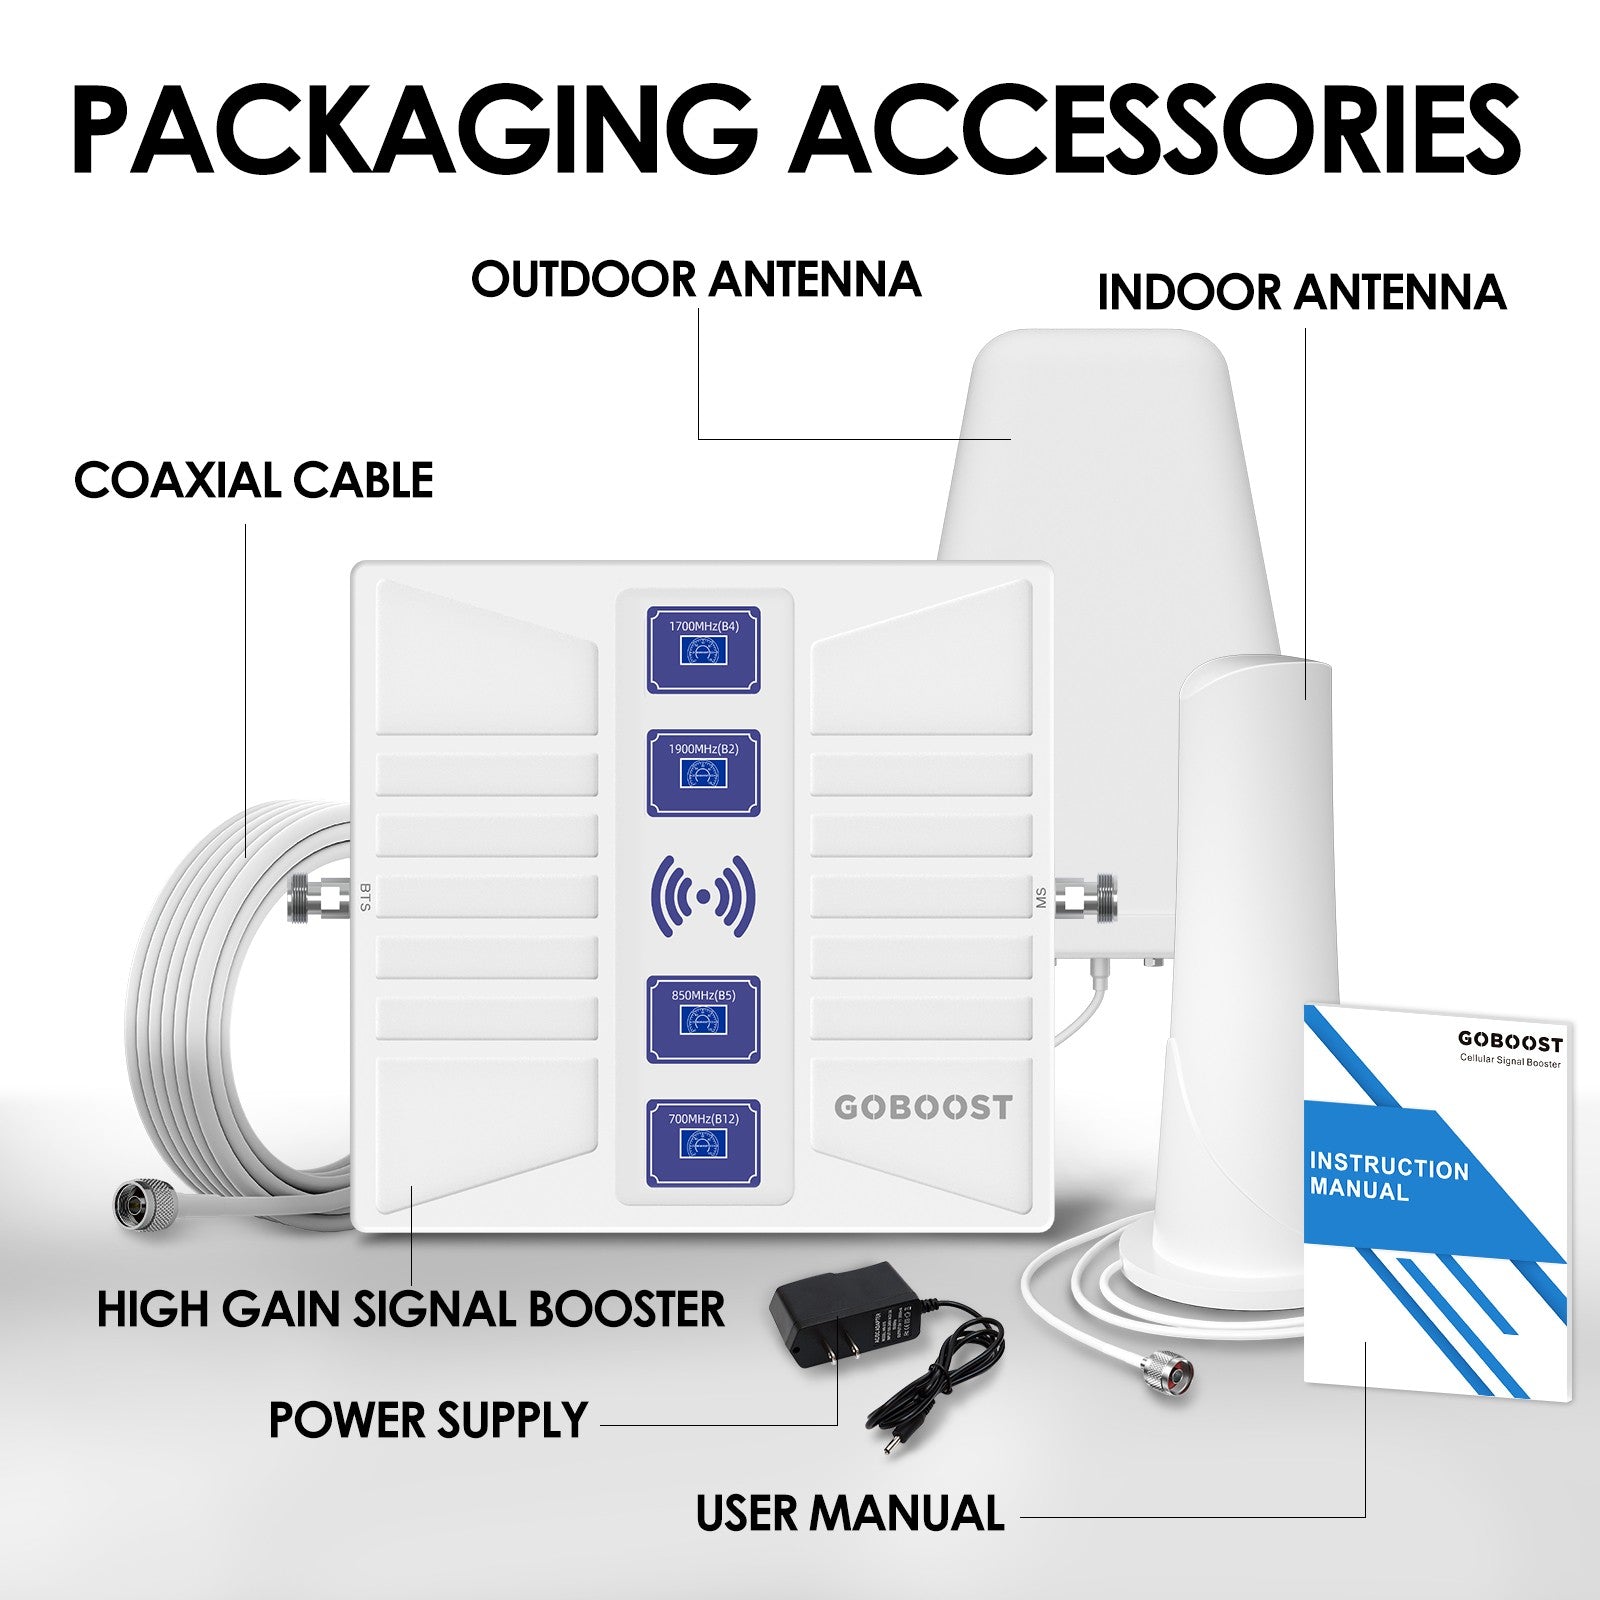 GOBOOST Four Band Signal Booster LPDA Packaging Accessories